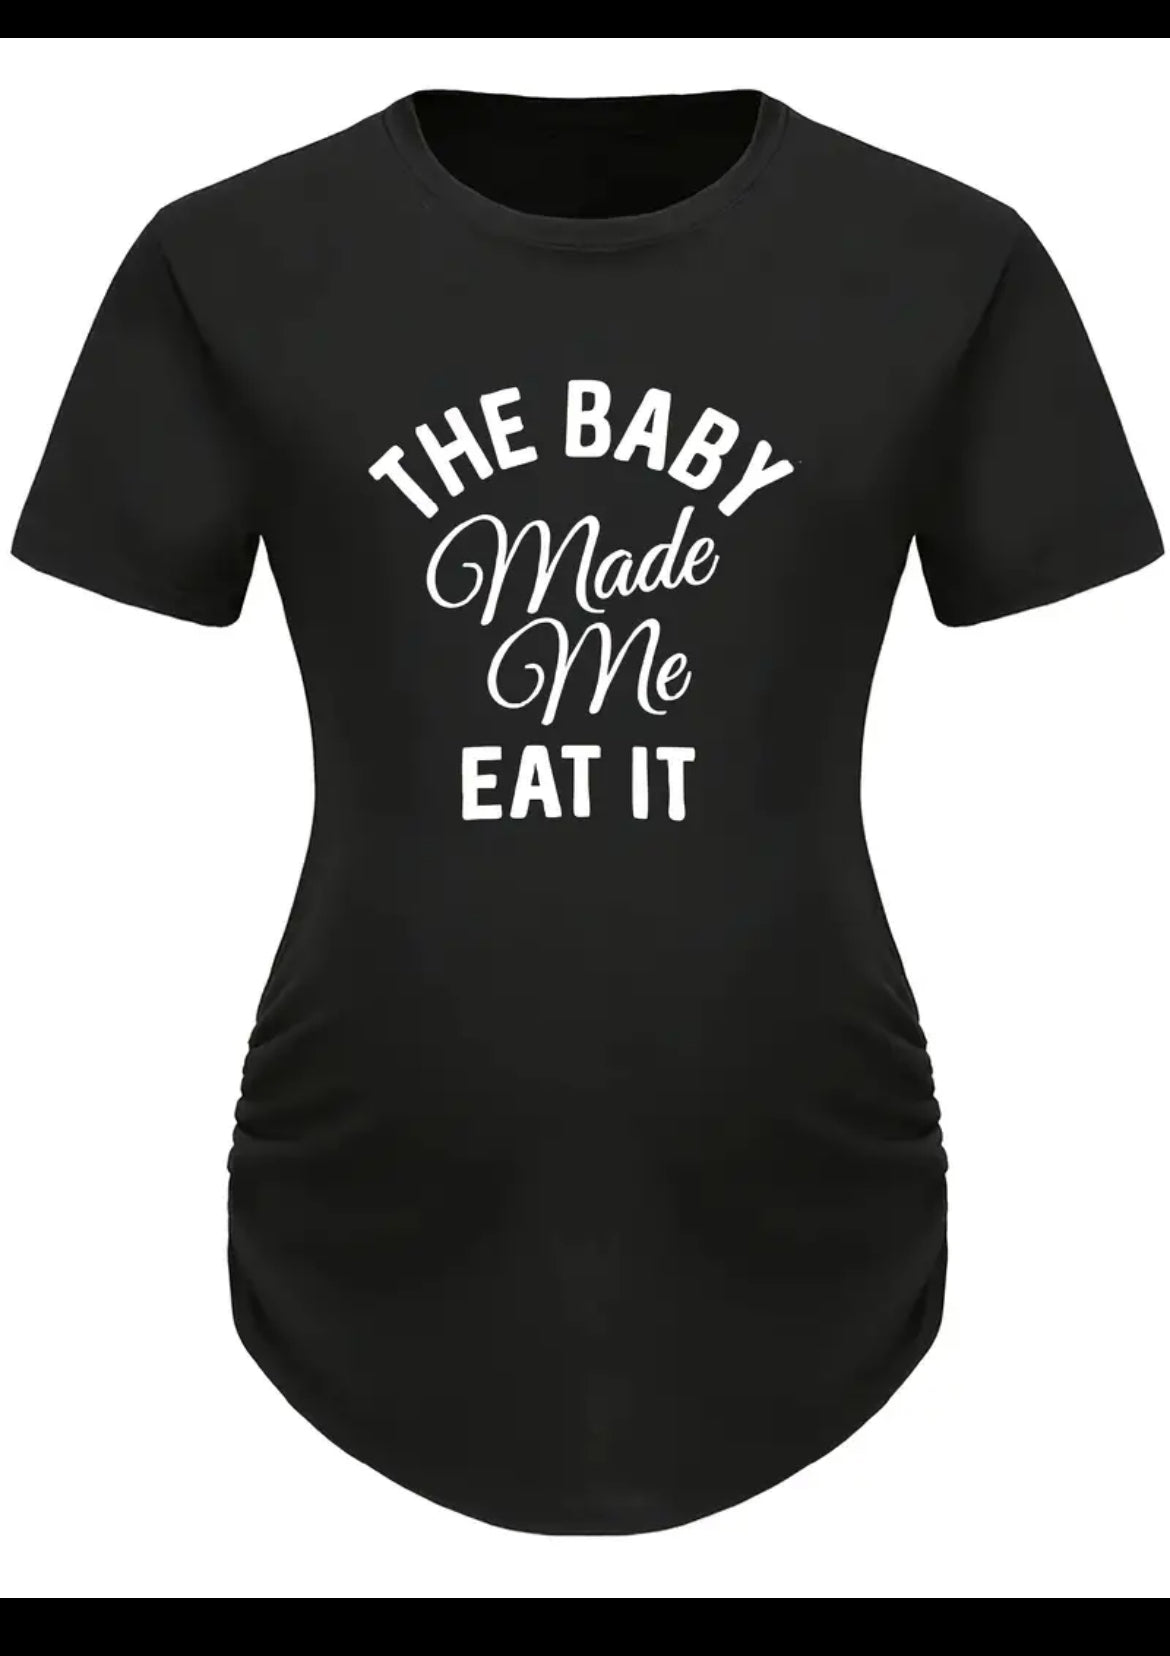 Women's Maternity Casual Trendy T-shirt Top With "MADE ME EAT IT" Comfortable Breathable Pregnancy Tees Top